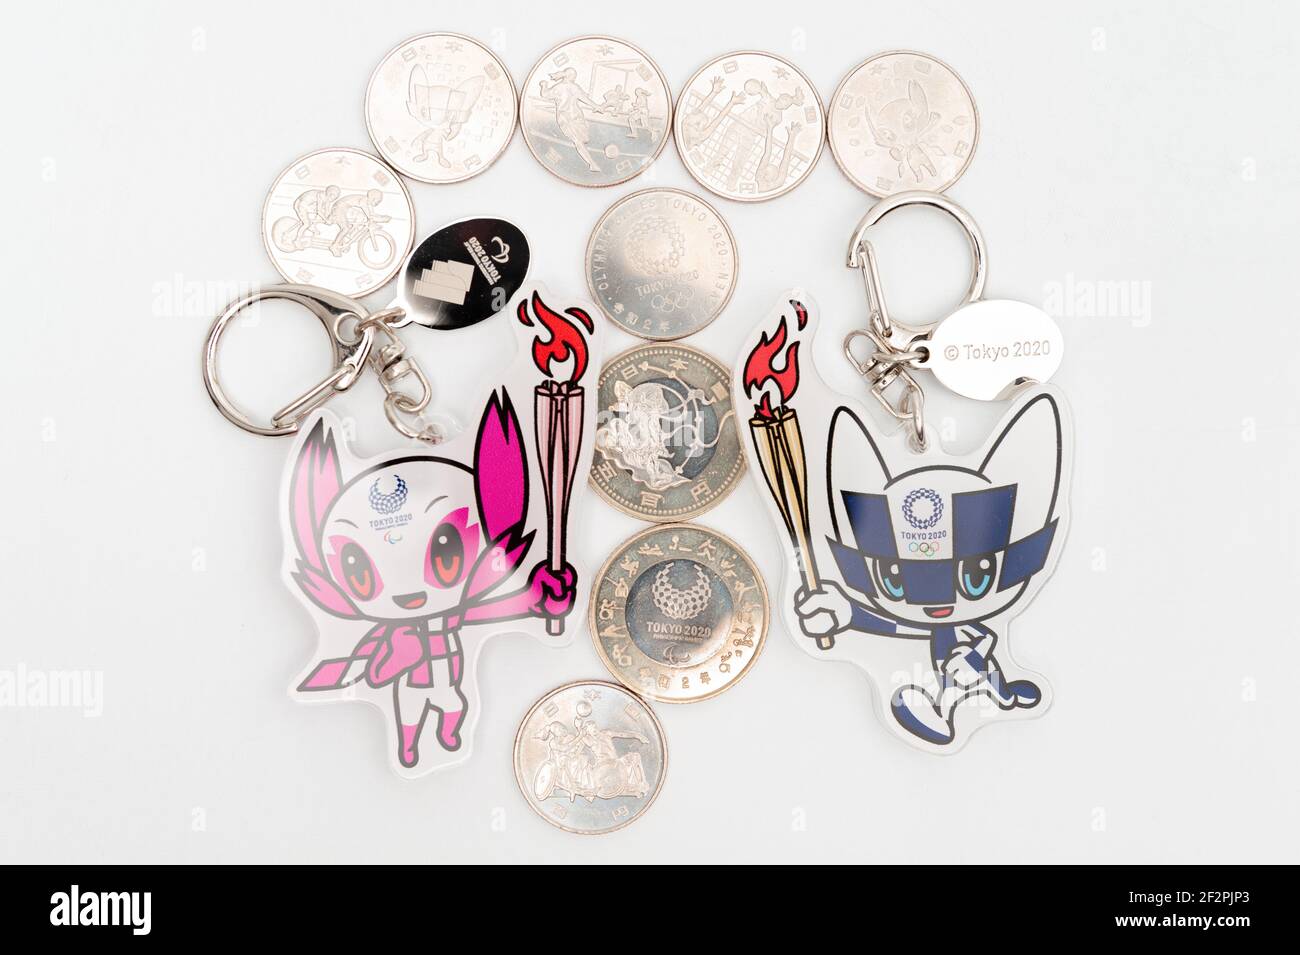 Tokyo, Japan - January 4, 2021: Mascot keychains and commemorative coins of 100 yen and 500 yen for the Tokyo 2020 Olympics. Stock Photo